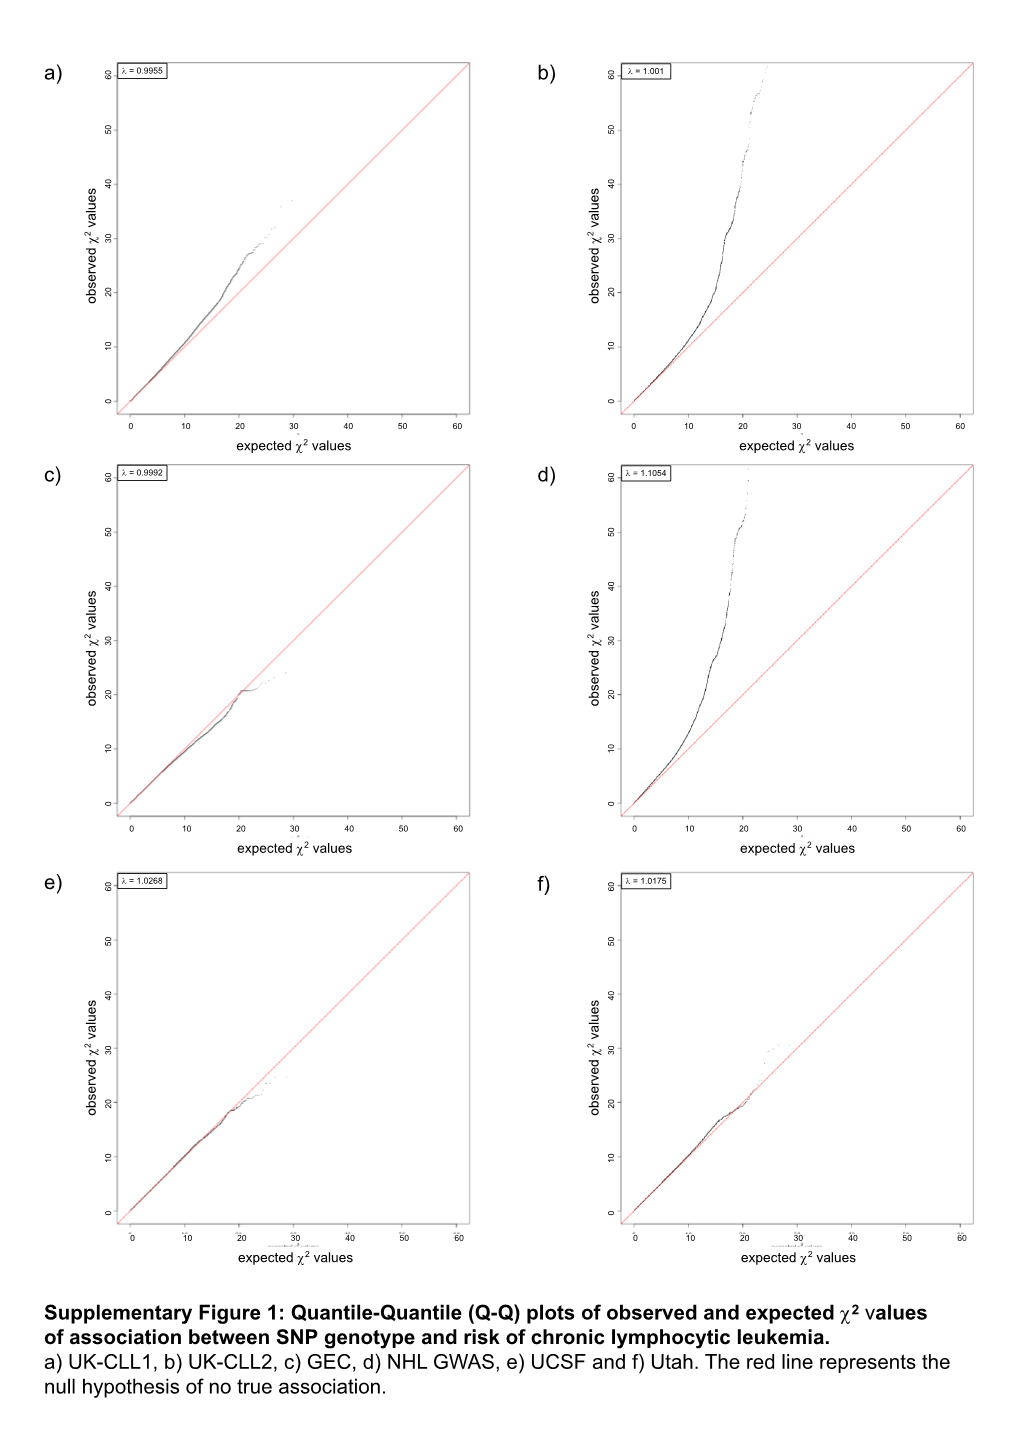 Plots of Observed and Expected Χ2 Values of Association Between SNP Genotype and Risk of Chronic Lymphocytic Leukemia